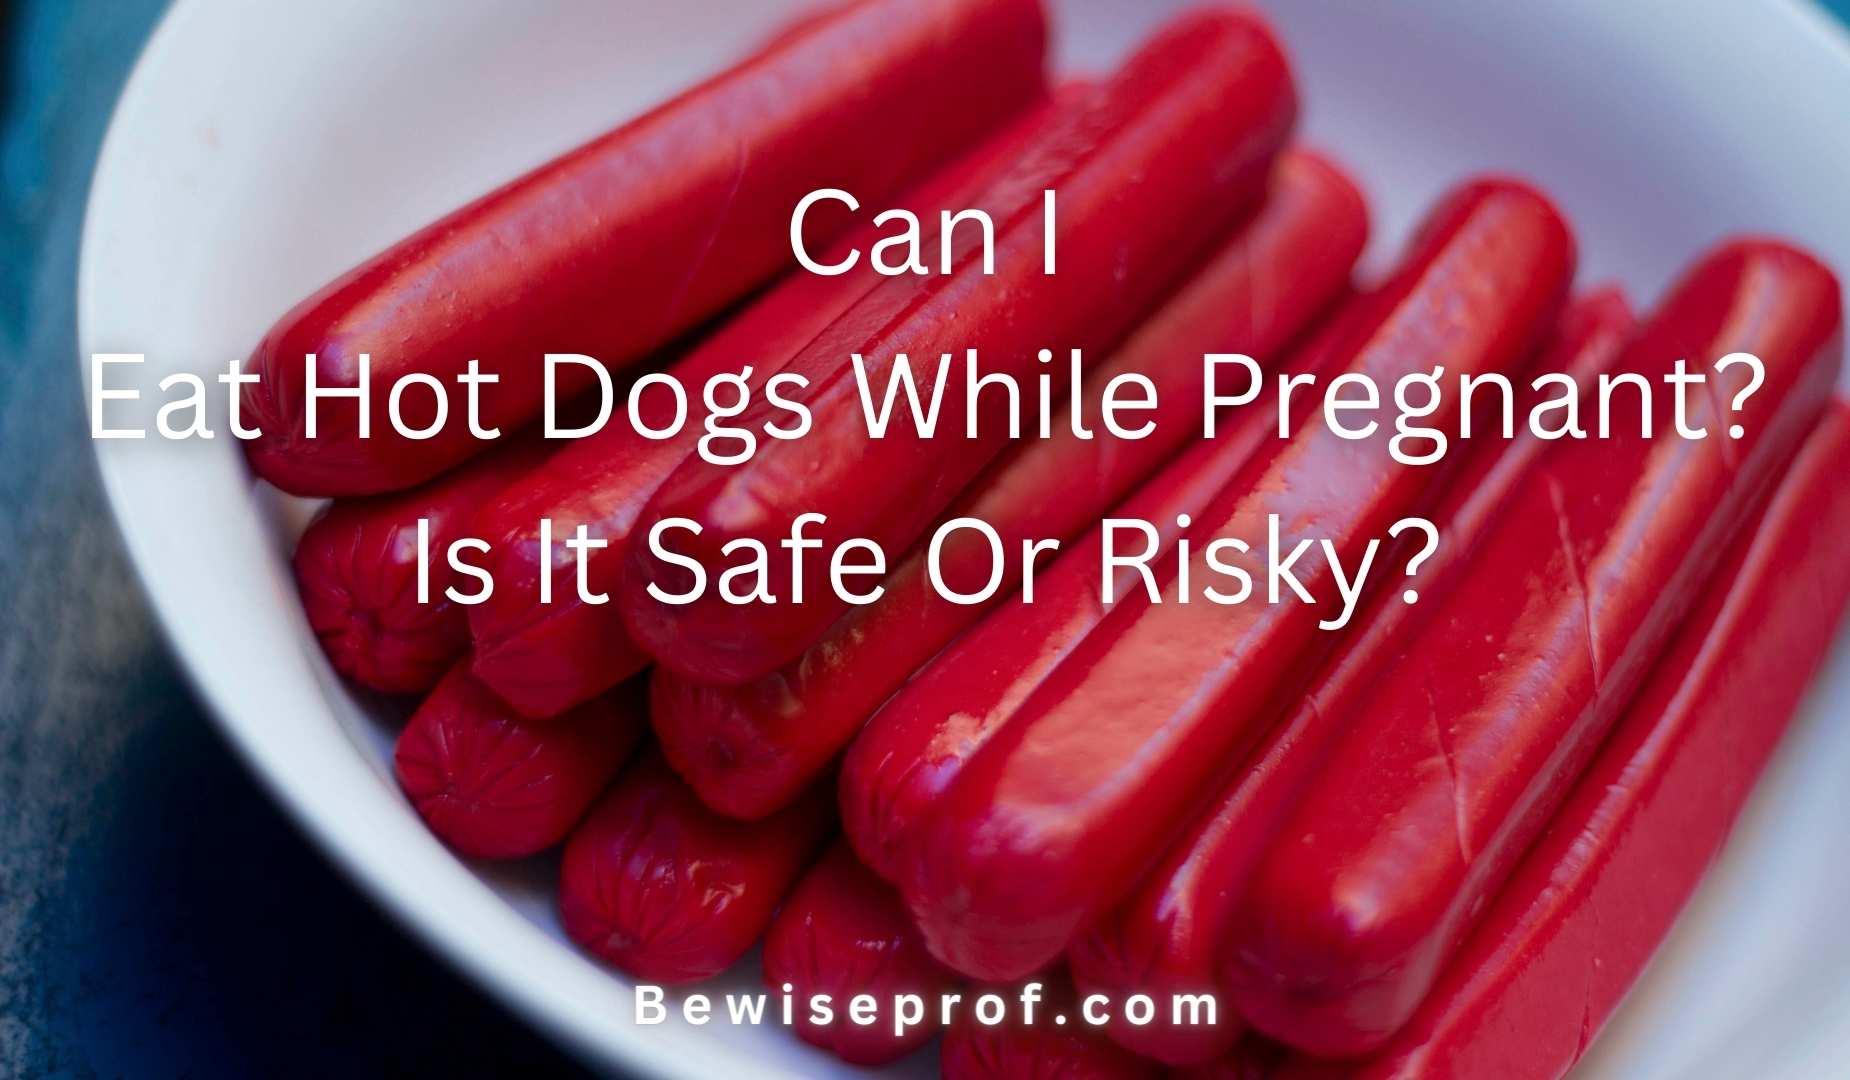 Can I Eat Hot Dogs While Pregnant? Is It Safe Or Risky?